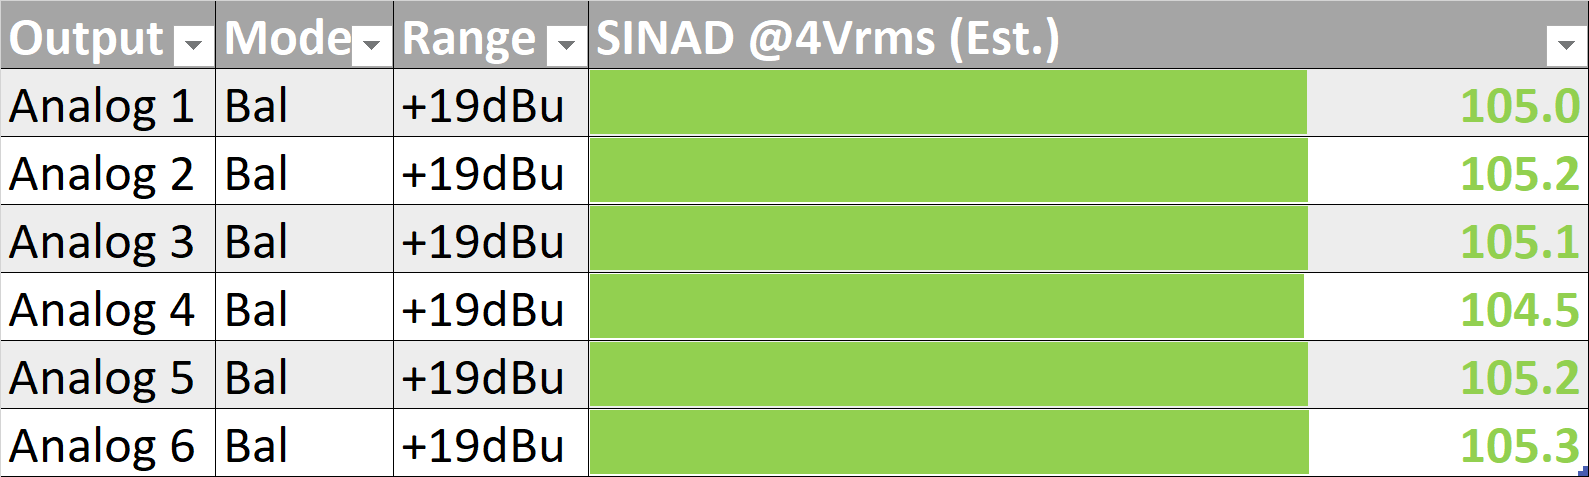 RME UCX II SINAD Table.png